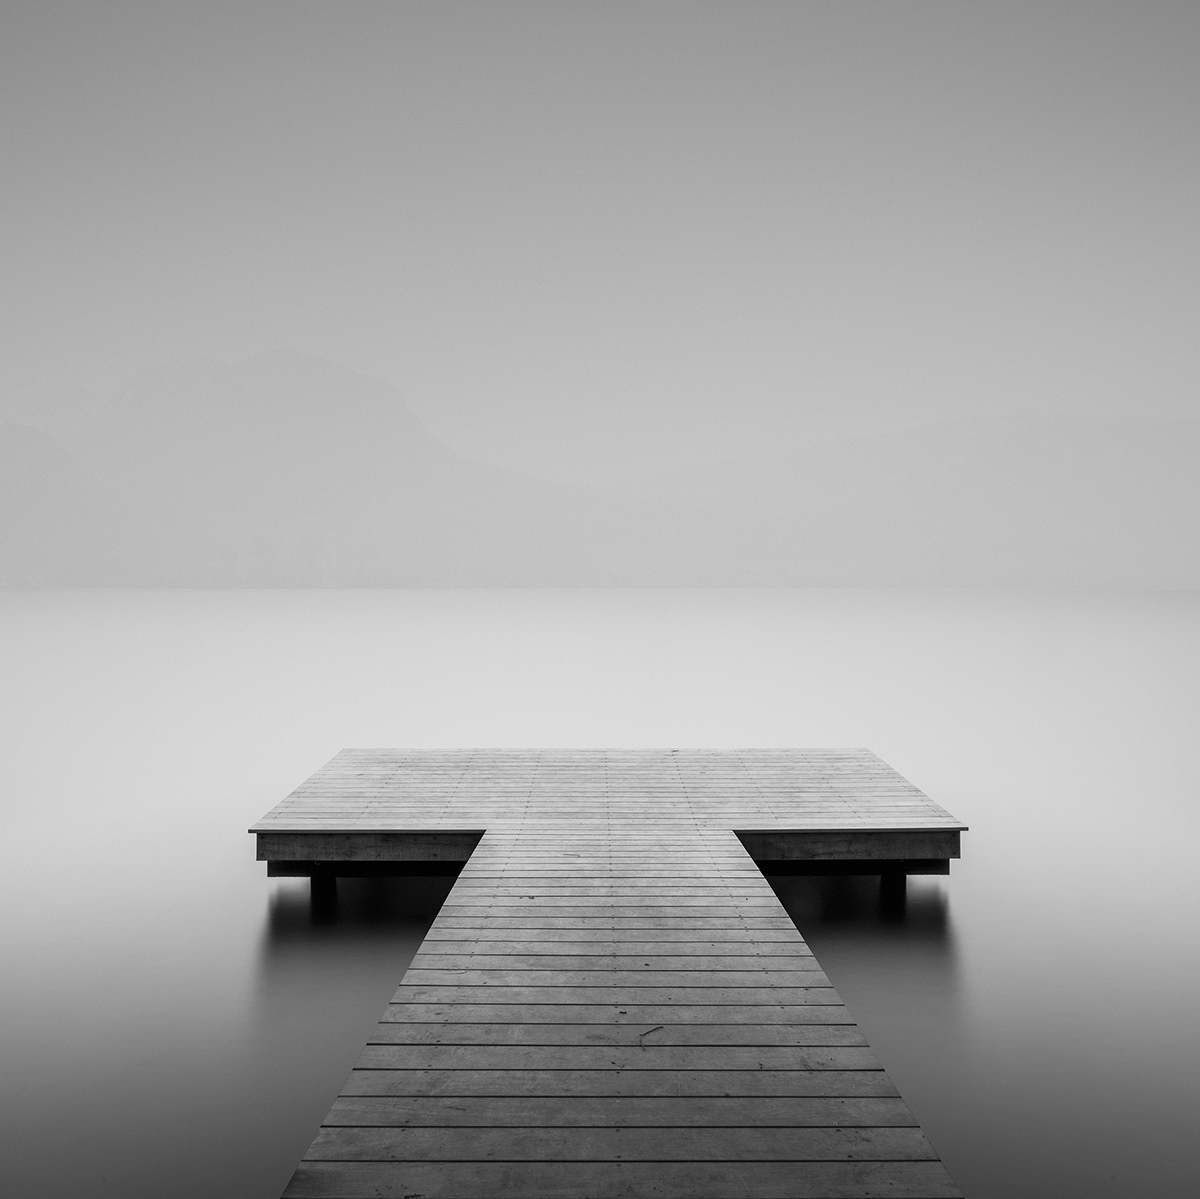 black and white fine art waterscapes mood long exposure lake fog